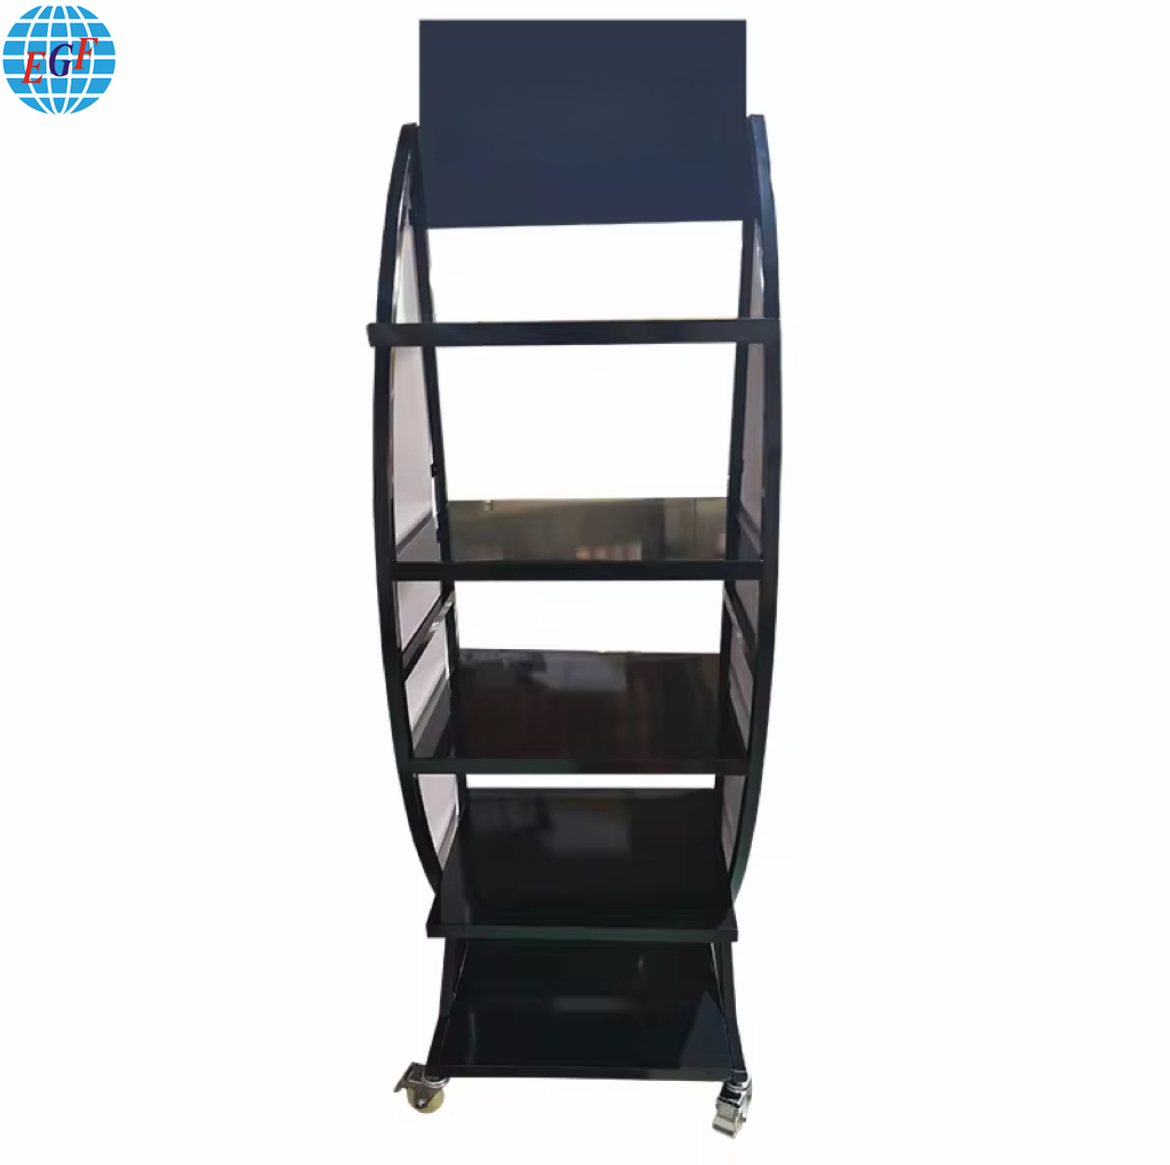 Custom Engine Motor Oil Display Rack System with Sturdy and Stable Three-Tier Metal Shelves, Top Logo Printing